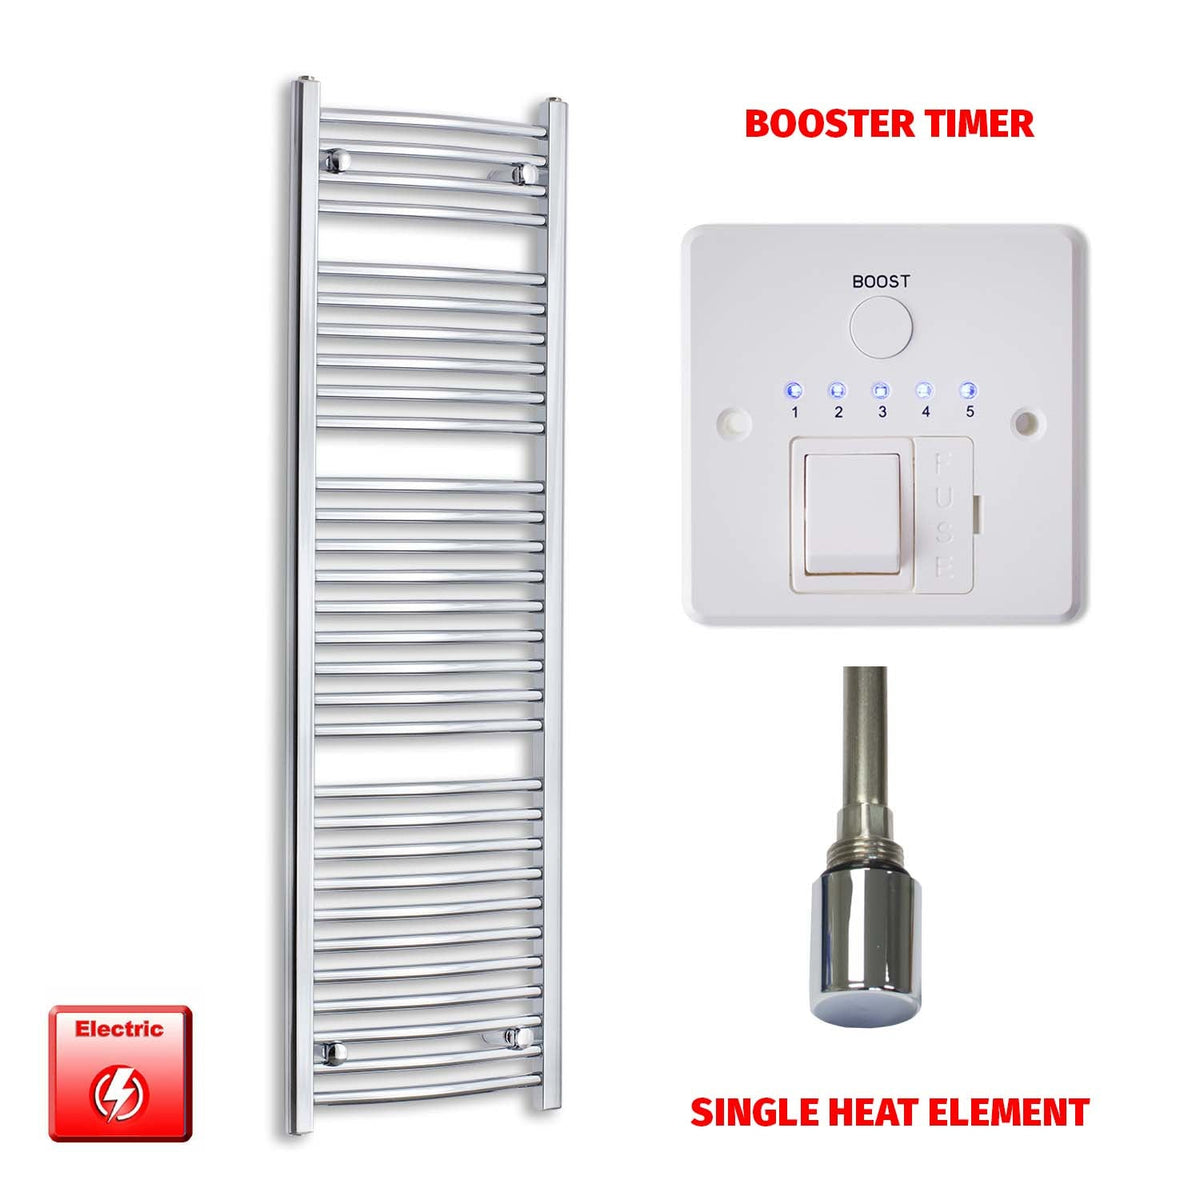 1500mm High 450mm Wide Pre-Filled Electric Heated Towel Radiator Straight or Curved Chrome Single heat element Booster timer